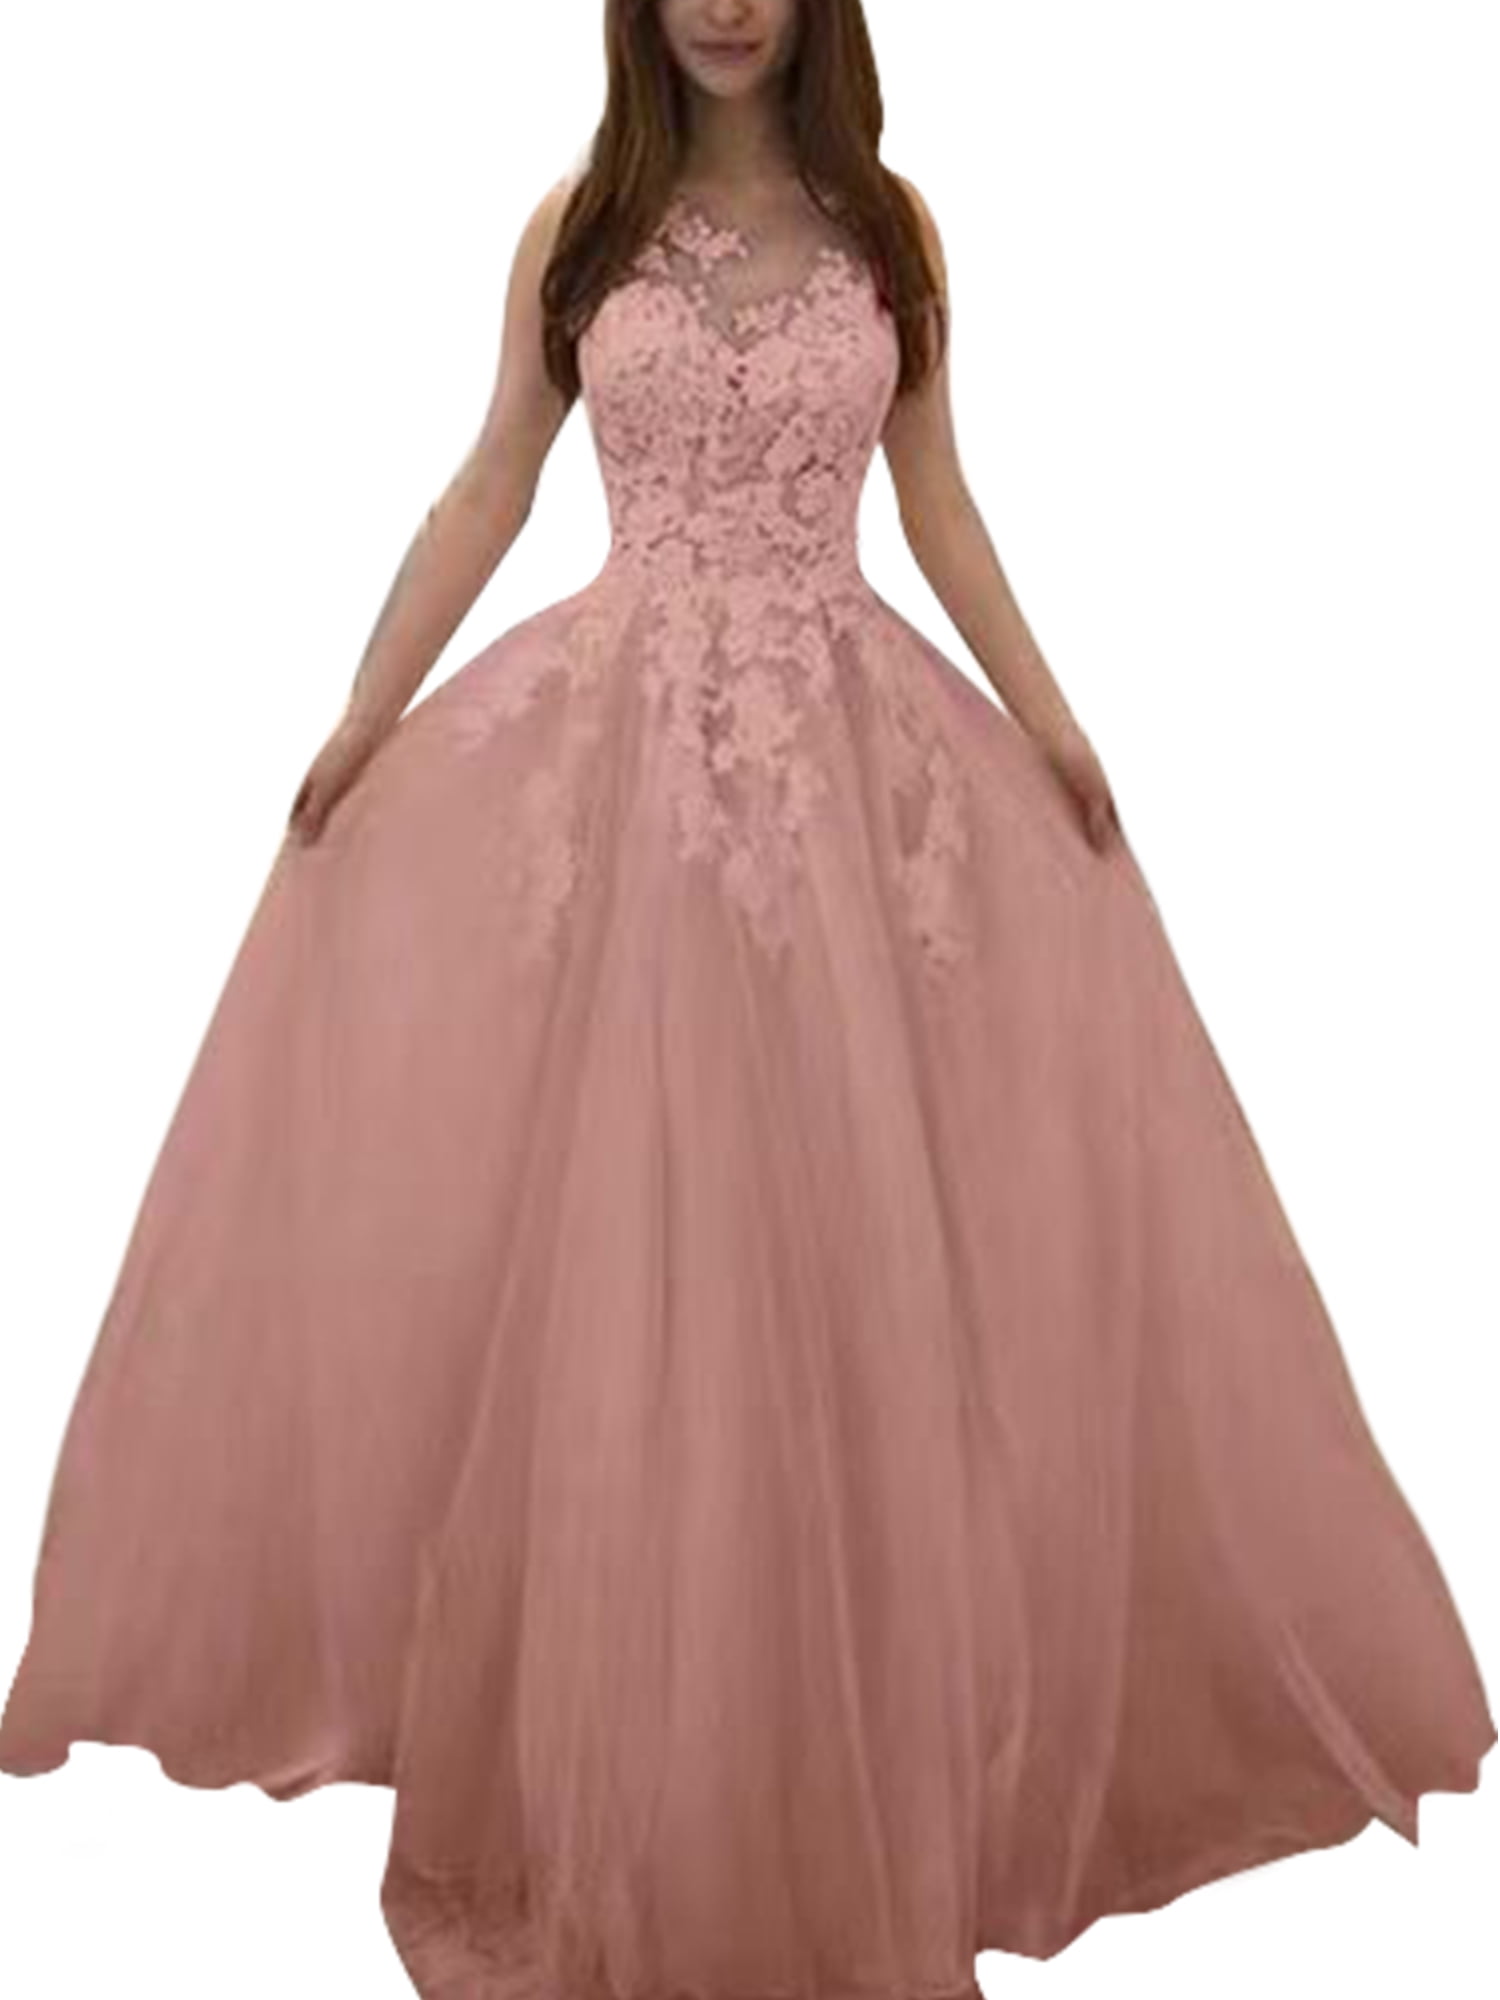 Long Chiffon Lace Evening Formal Party Ball Gown Prom Bridesmaid Dress Size 6-28 